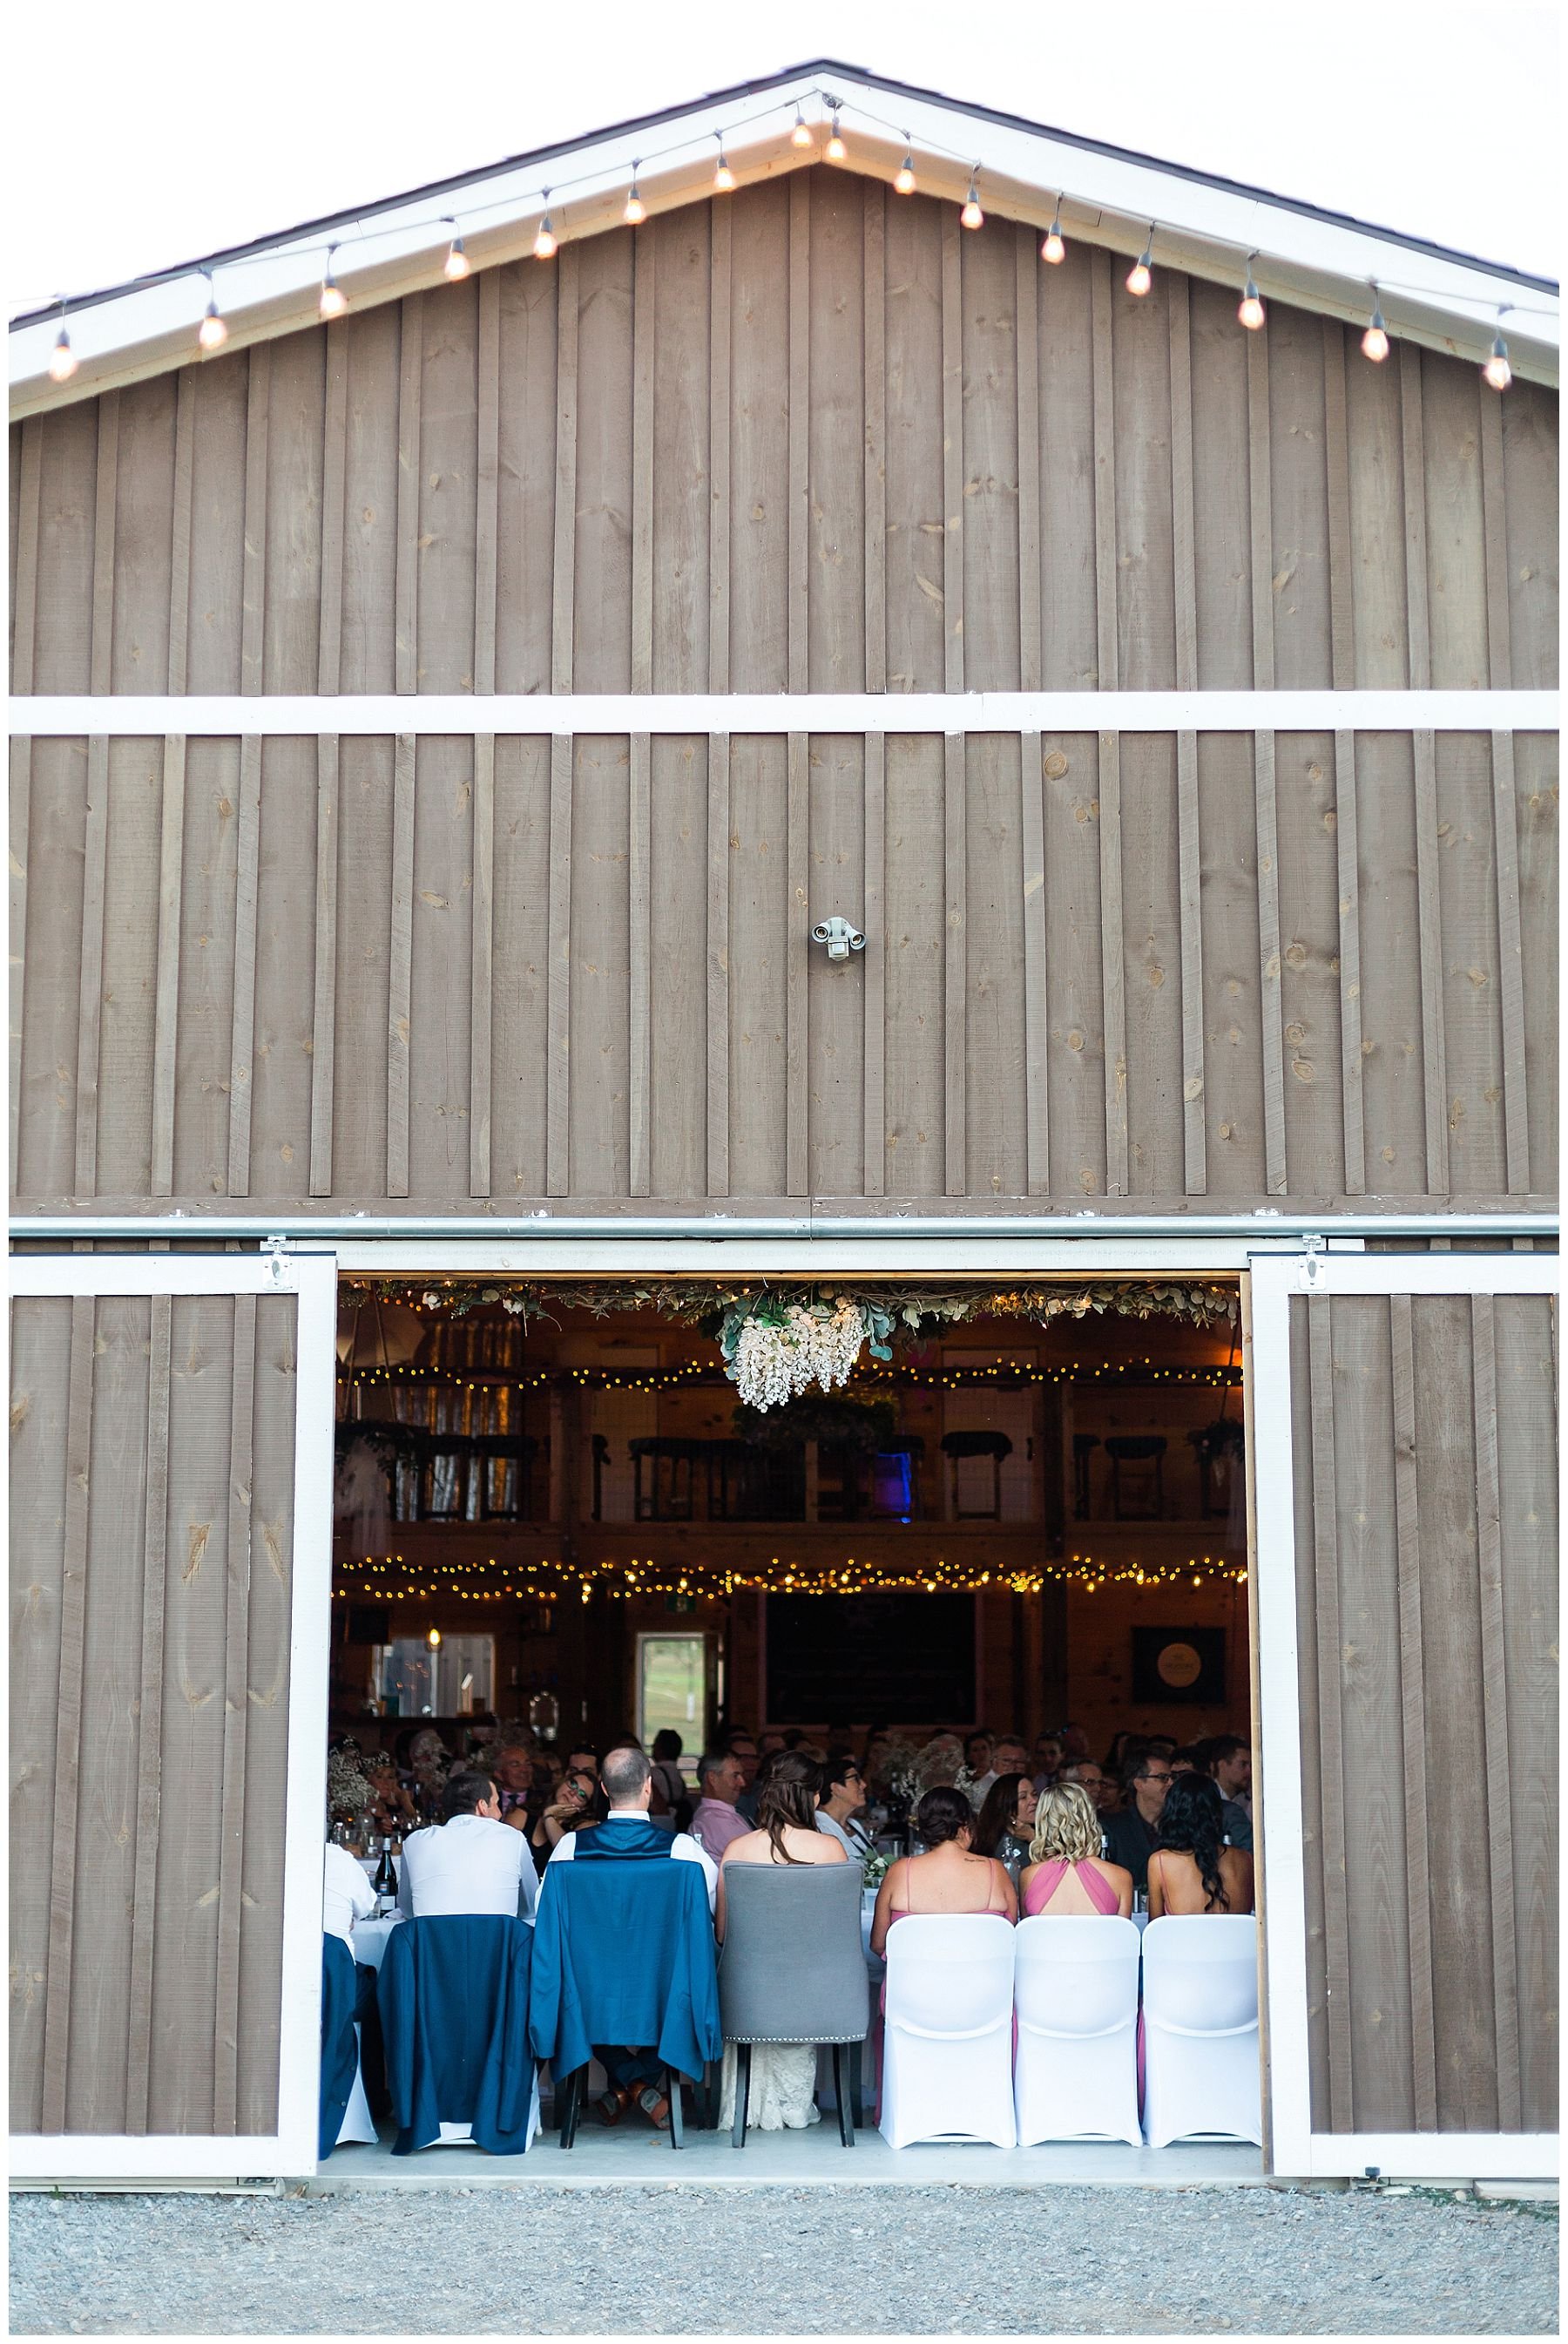 The Meadows catering wedding in Stirling ontario